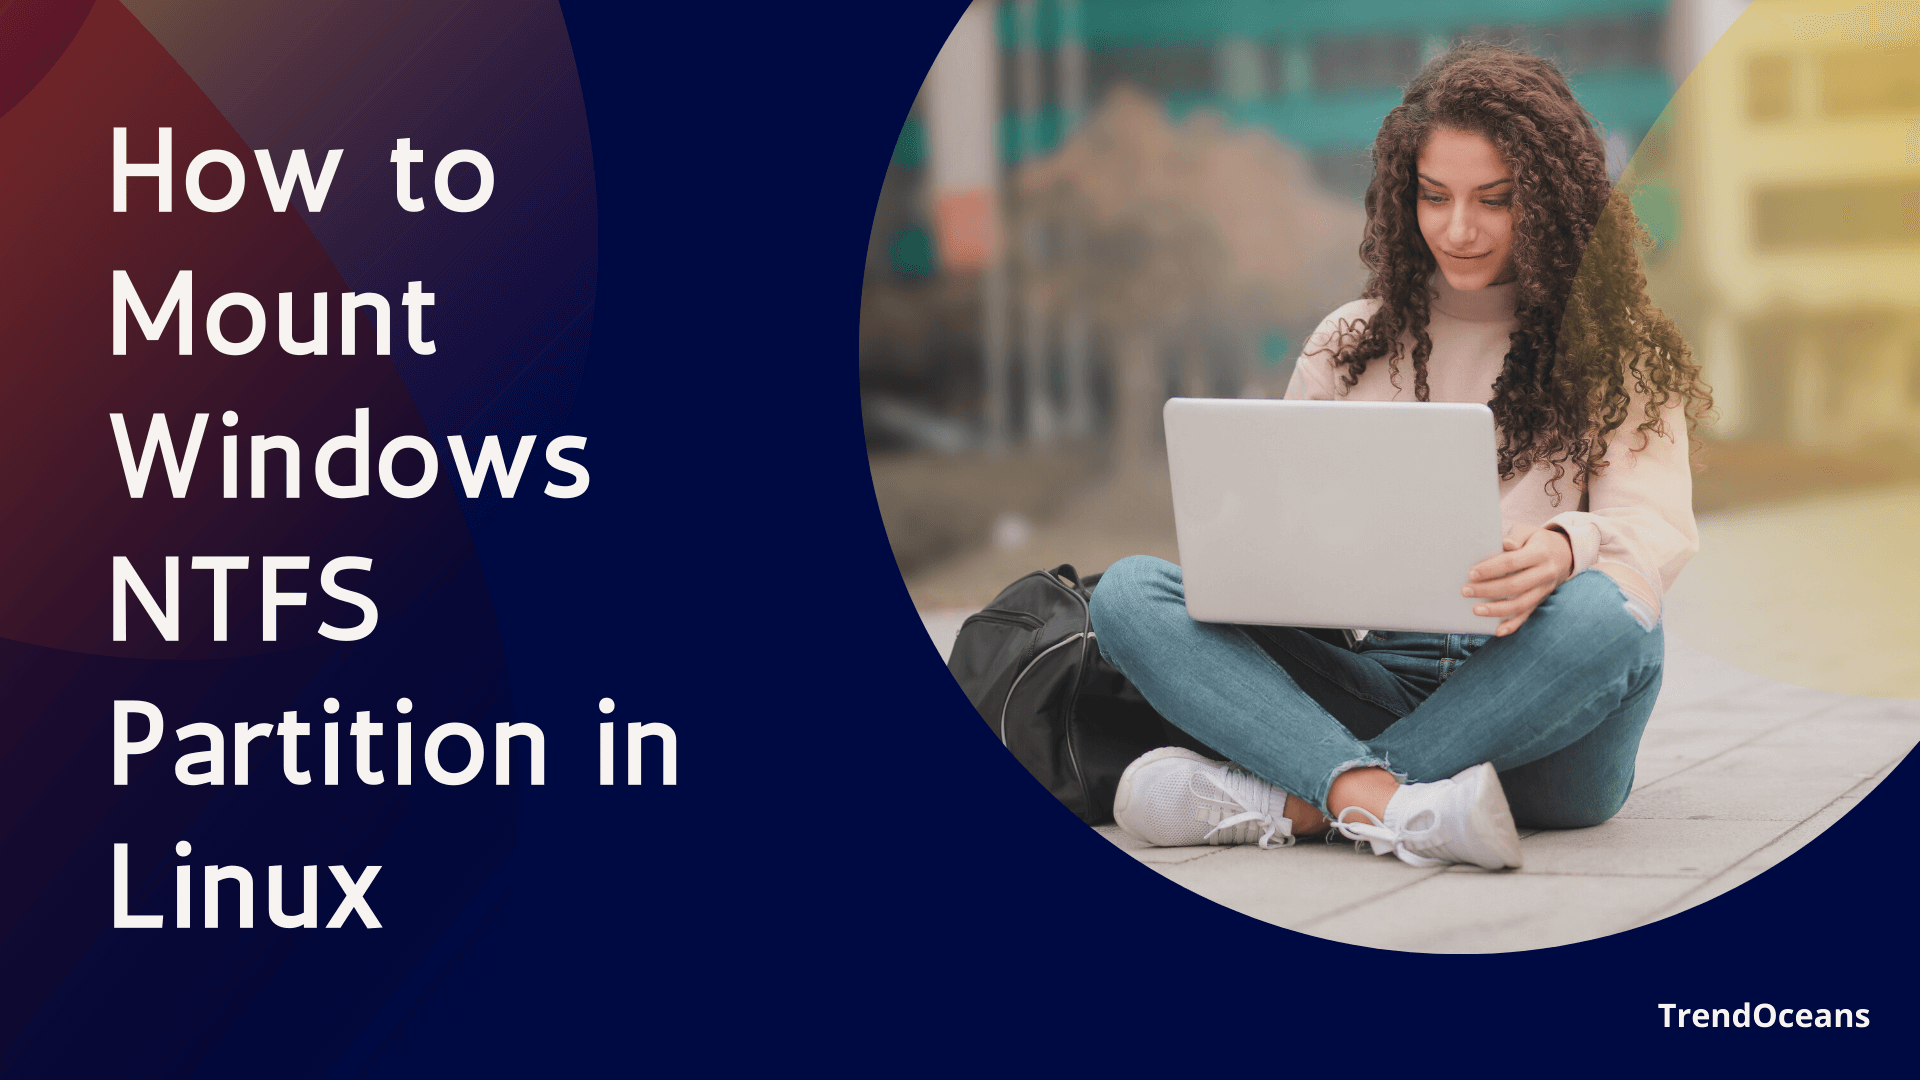 How to mount windows NTFS file partitions in Linux